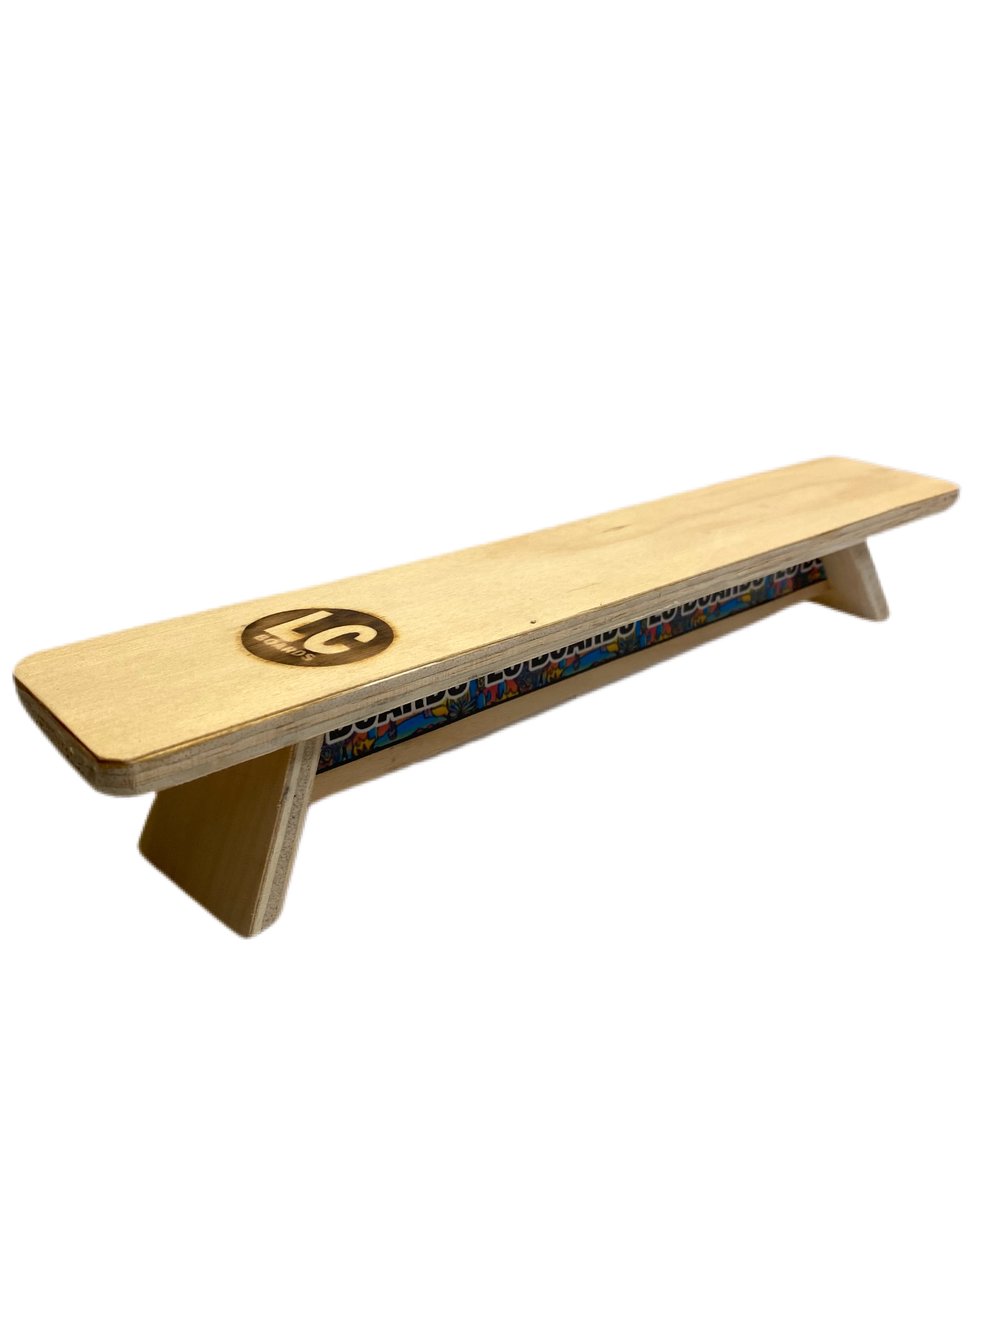 LC BOARDS Fingerboard Park Bench